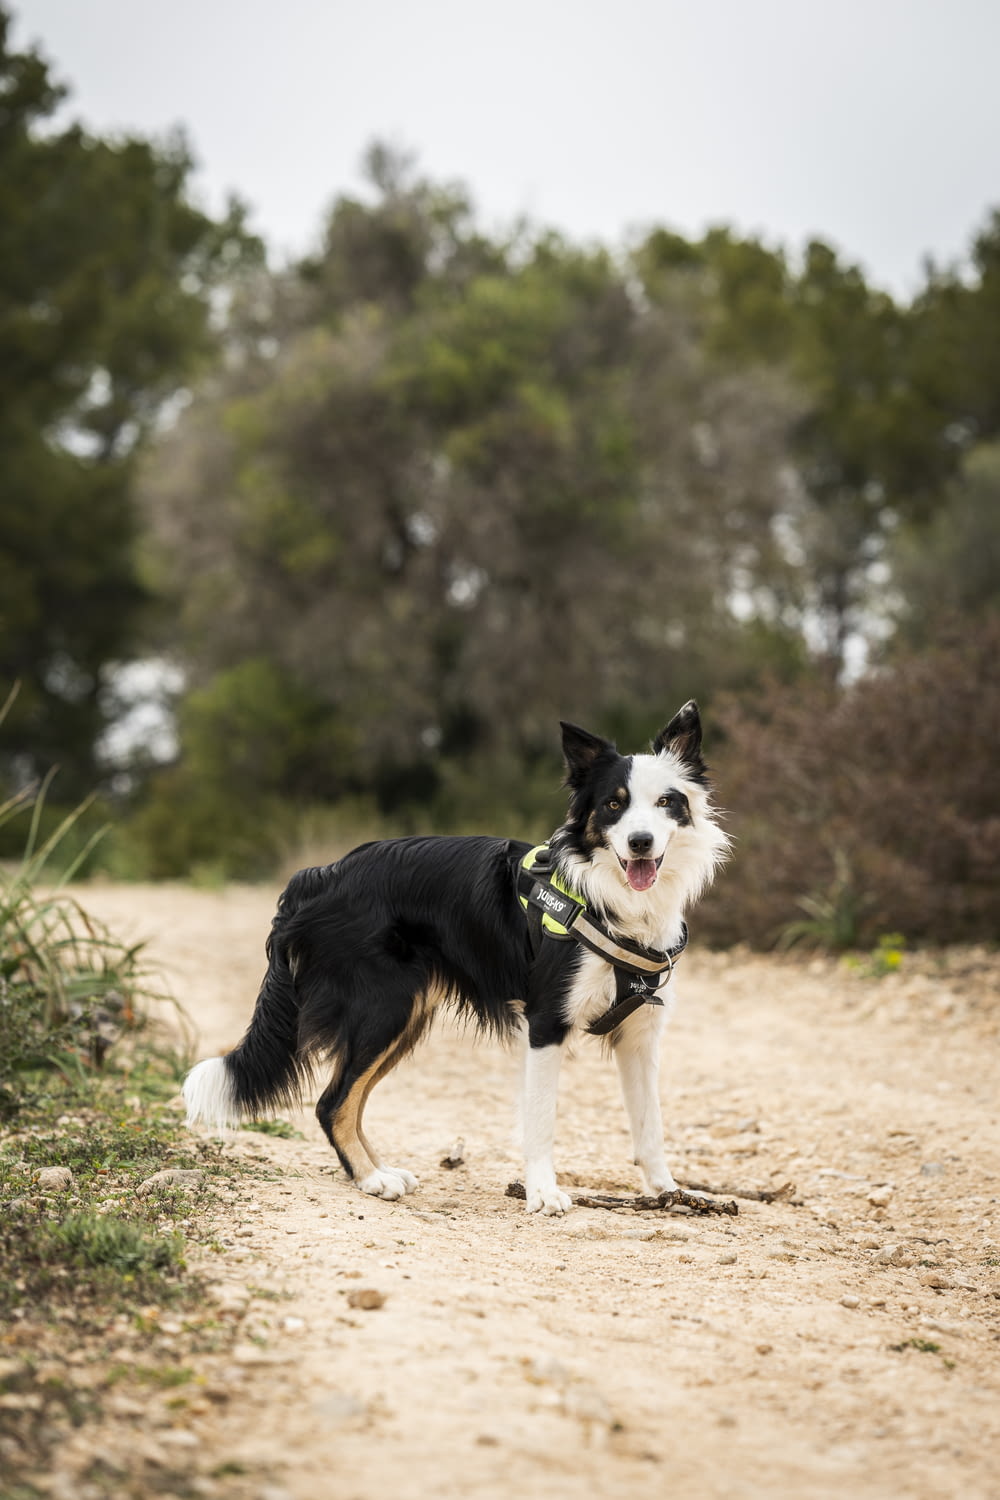 a black and white dog standing on a dirt road